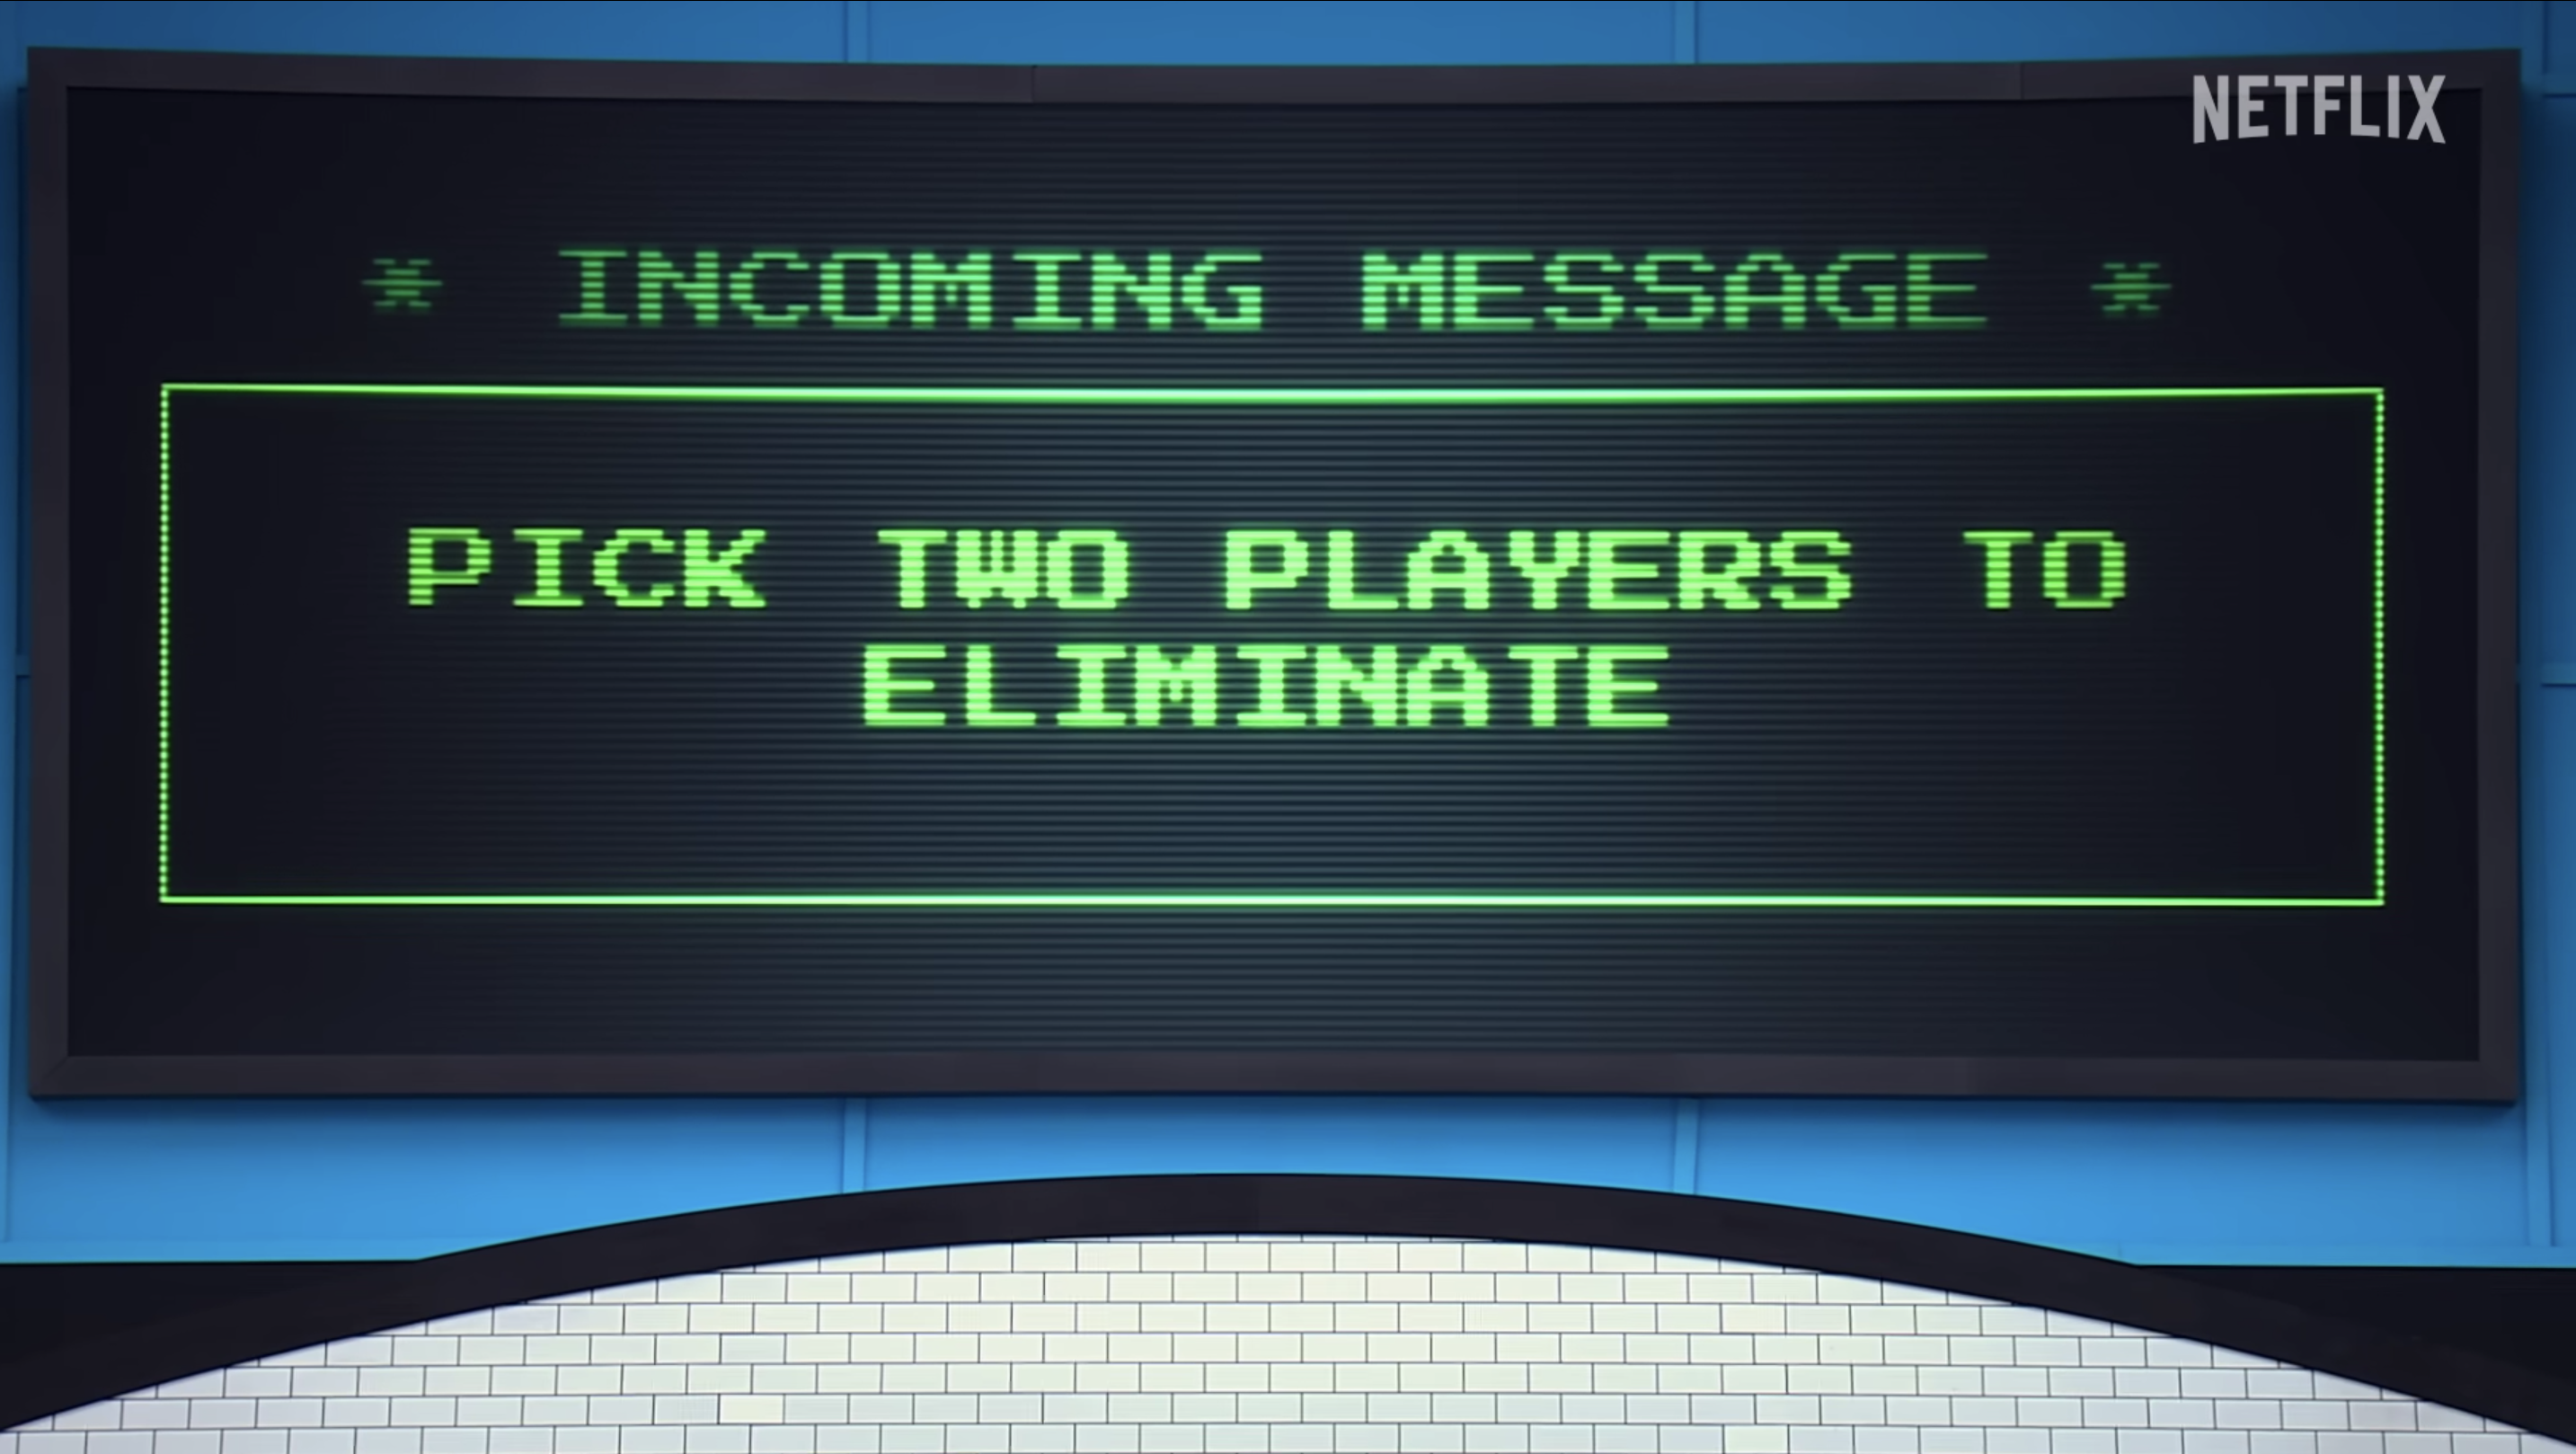 Digital sign: &quot;Incoming message: Pick two players to eliminate&quot;